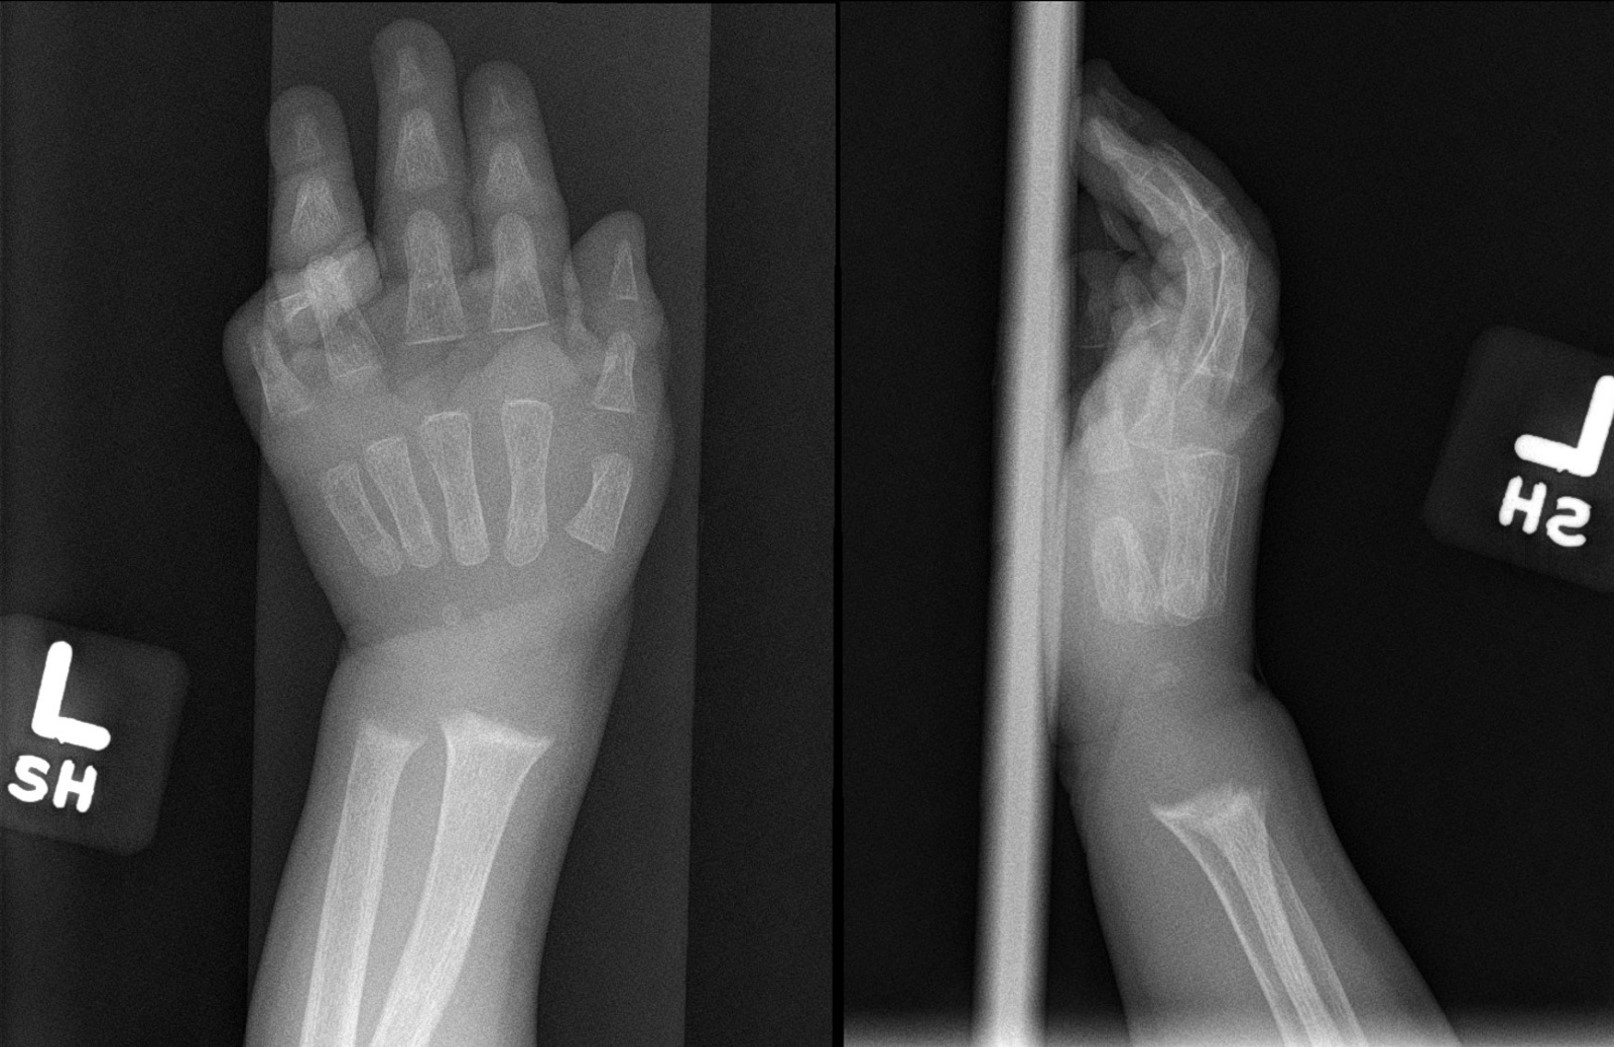 Radiograph of the left wrist (anteroposterior and lateral views) showing metaphyseal widening and irregularity of the distal radius and ulna indicative of rickets 
